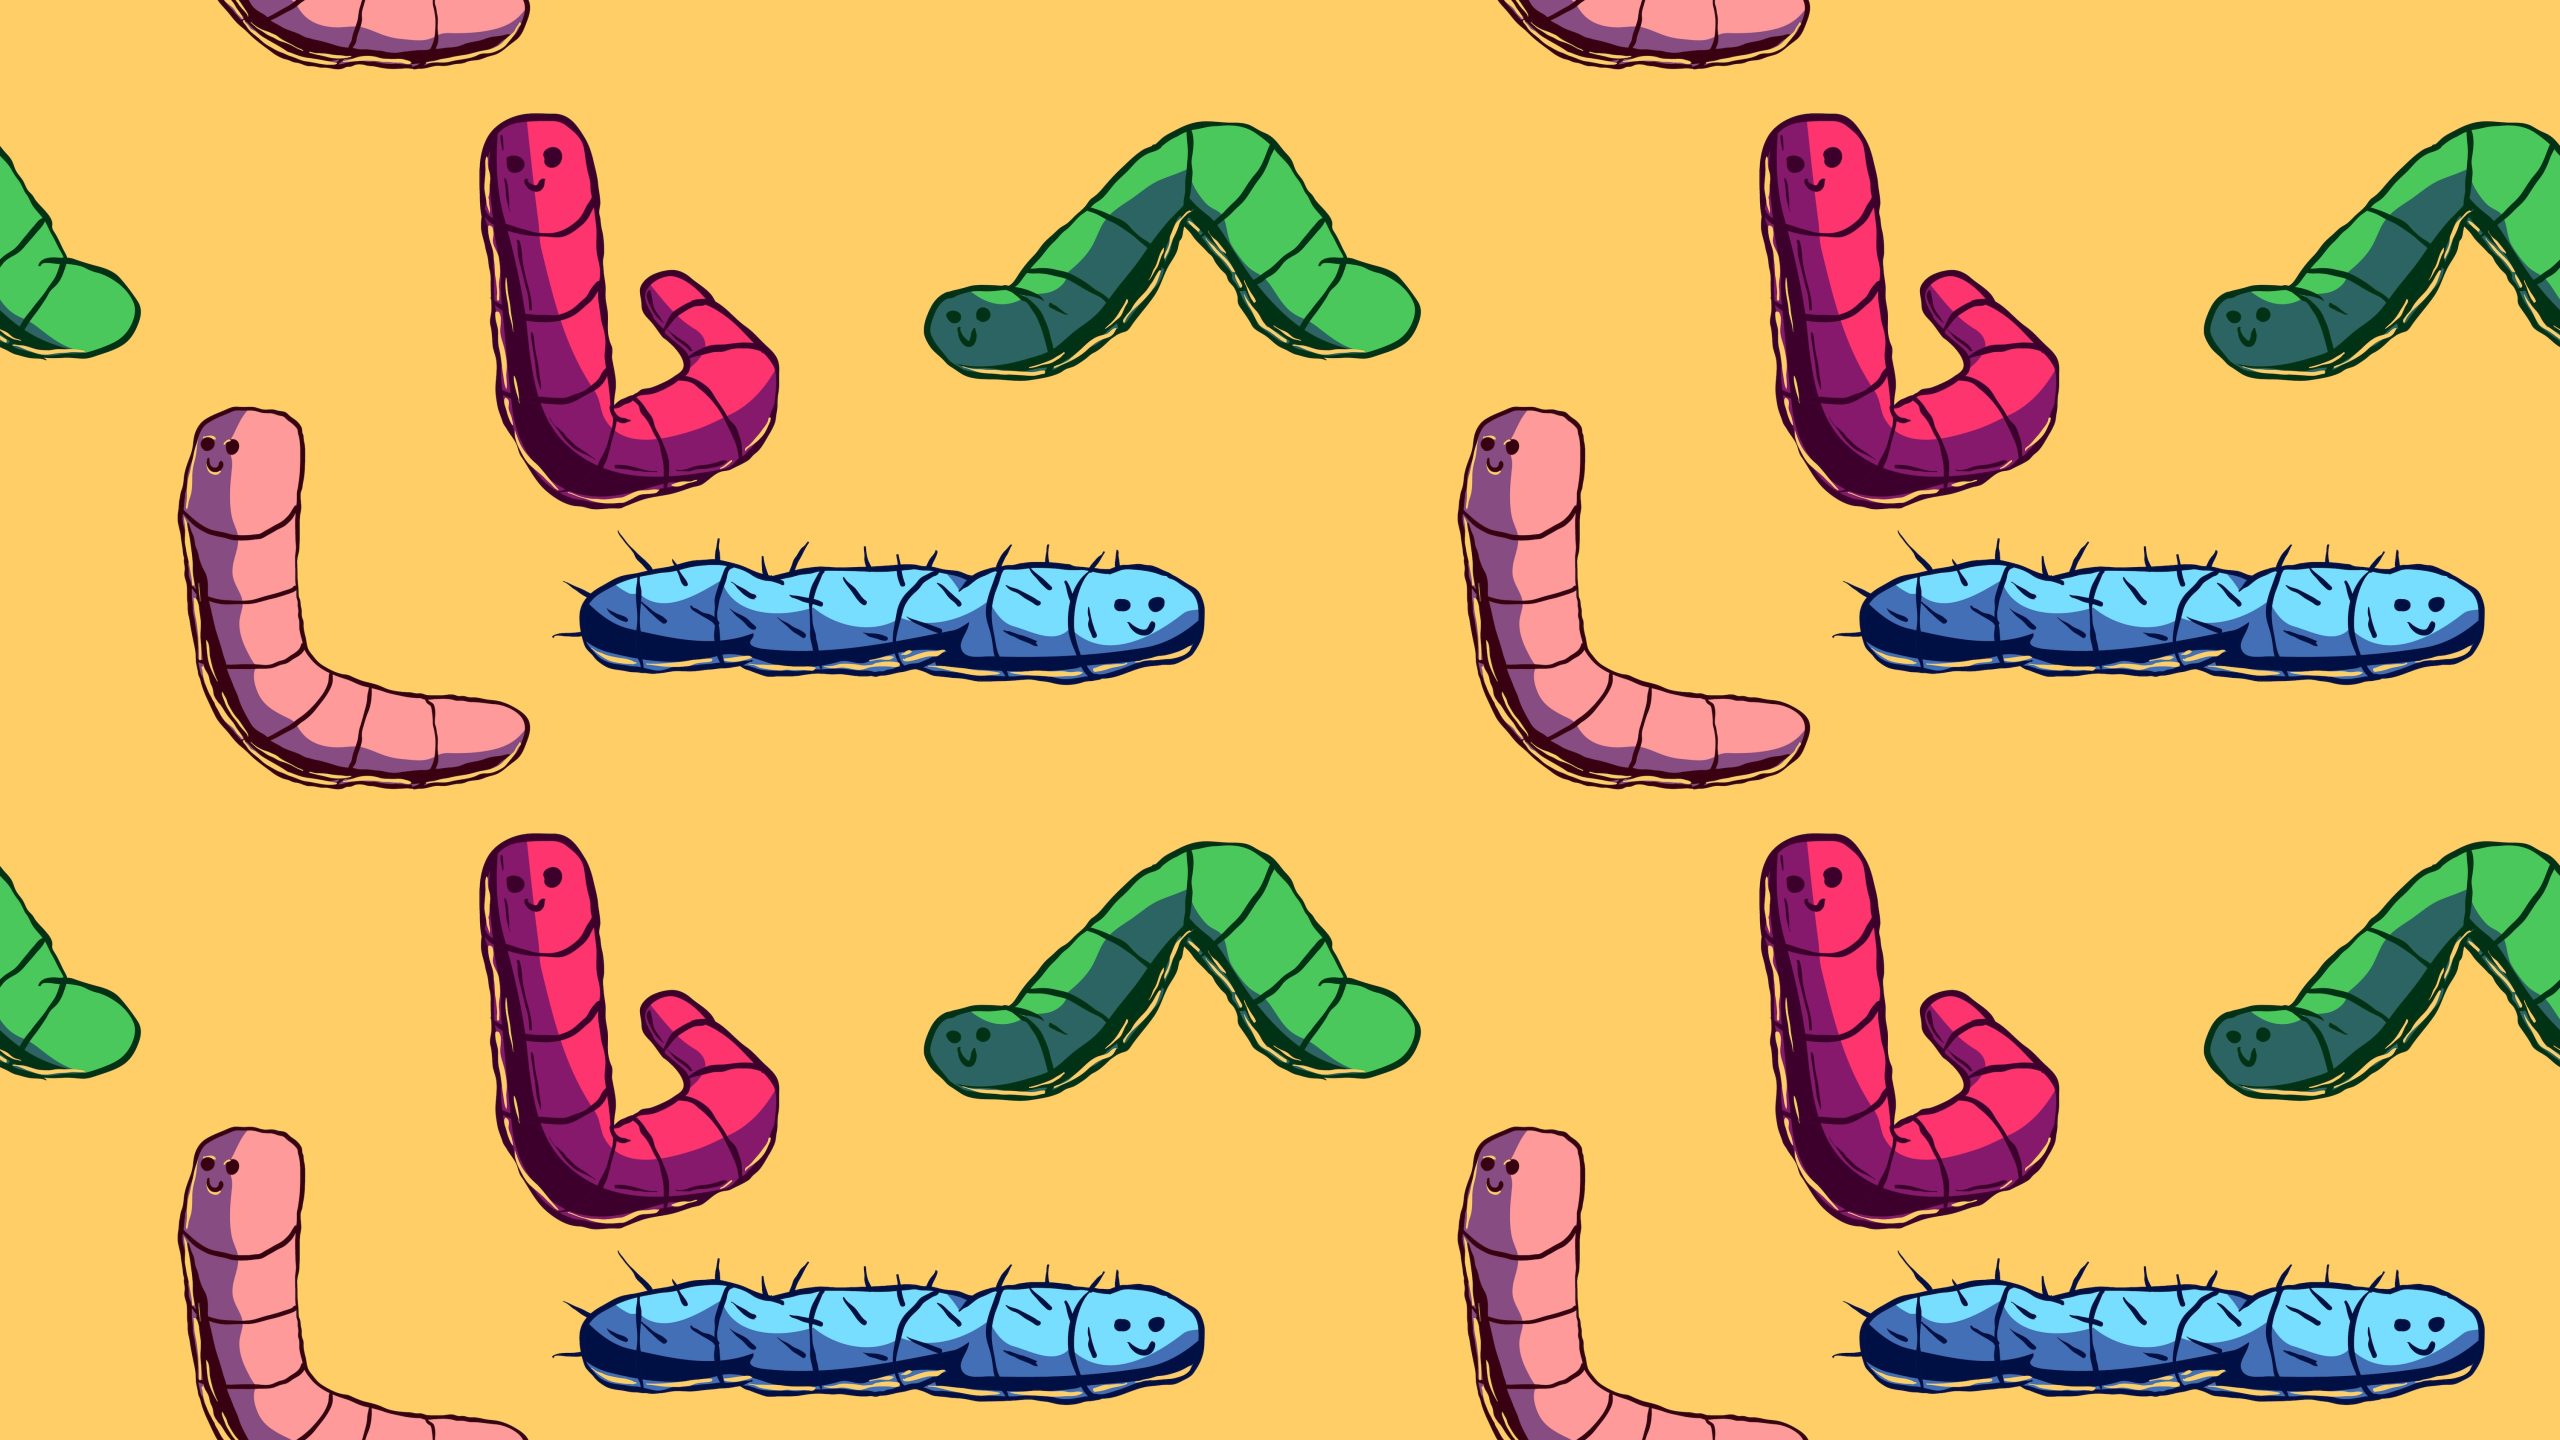 Colorful illustration of worms in different positions